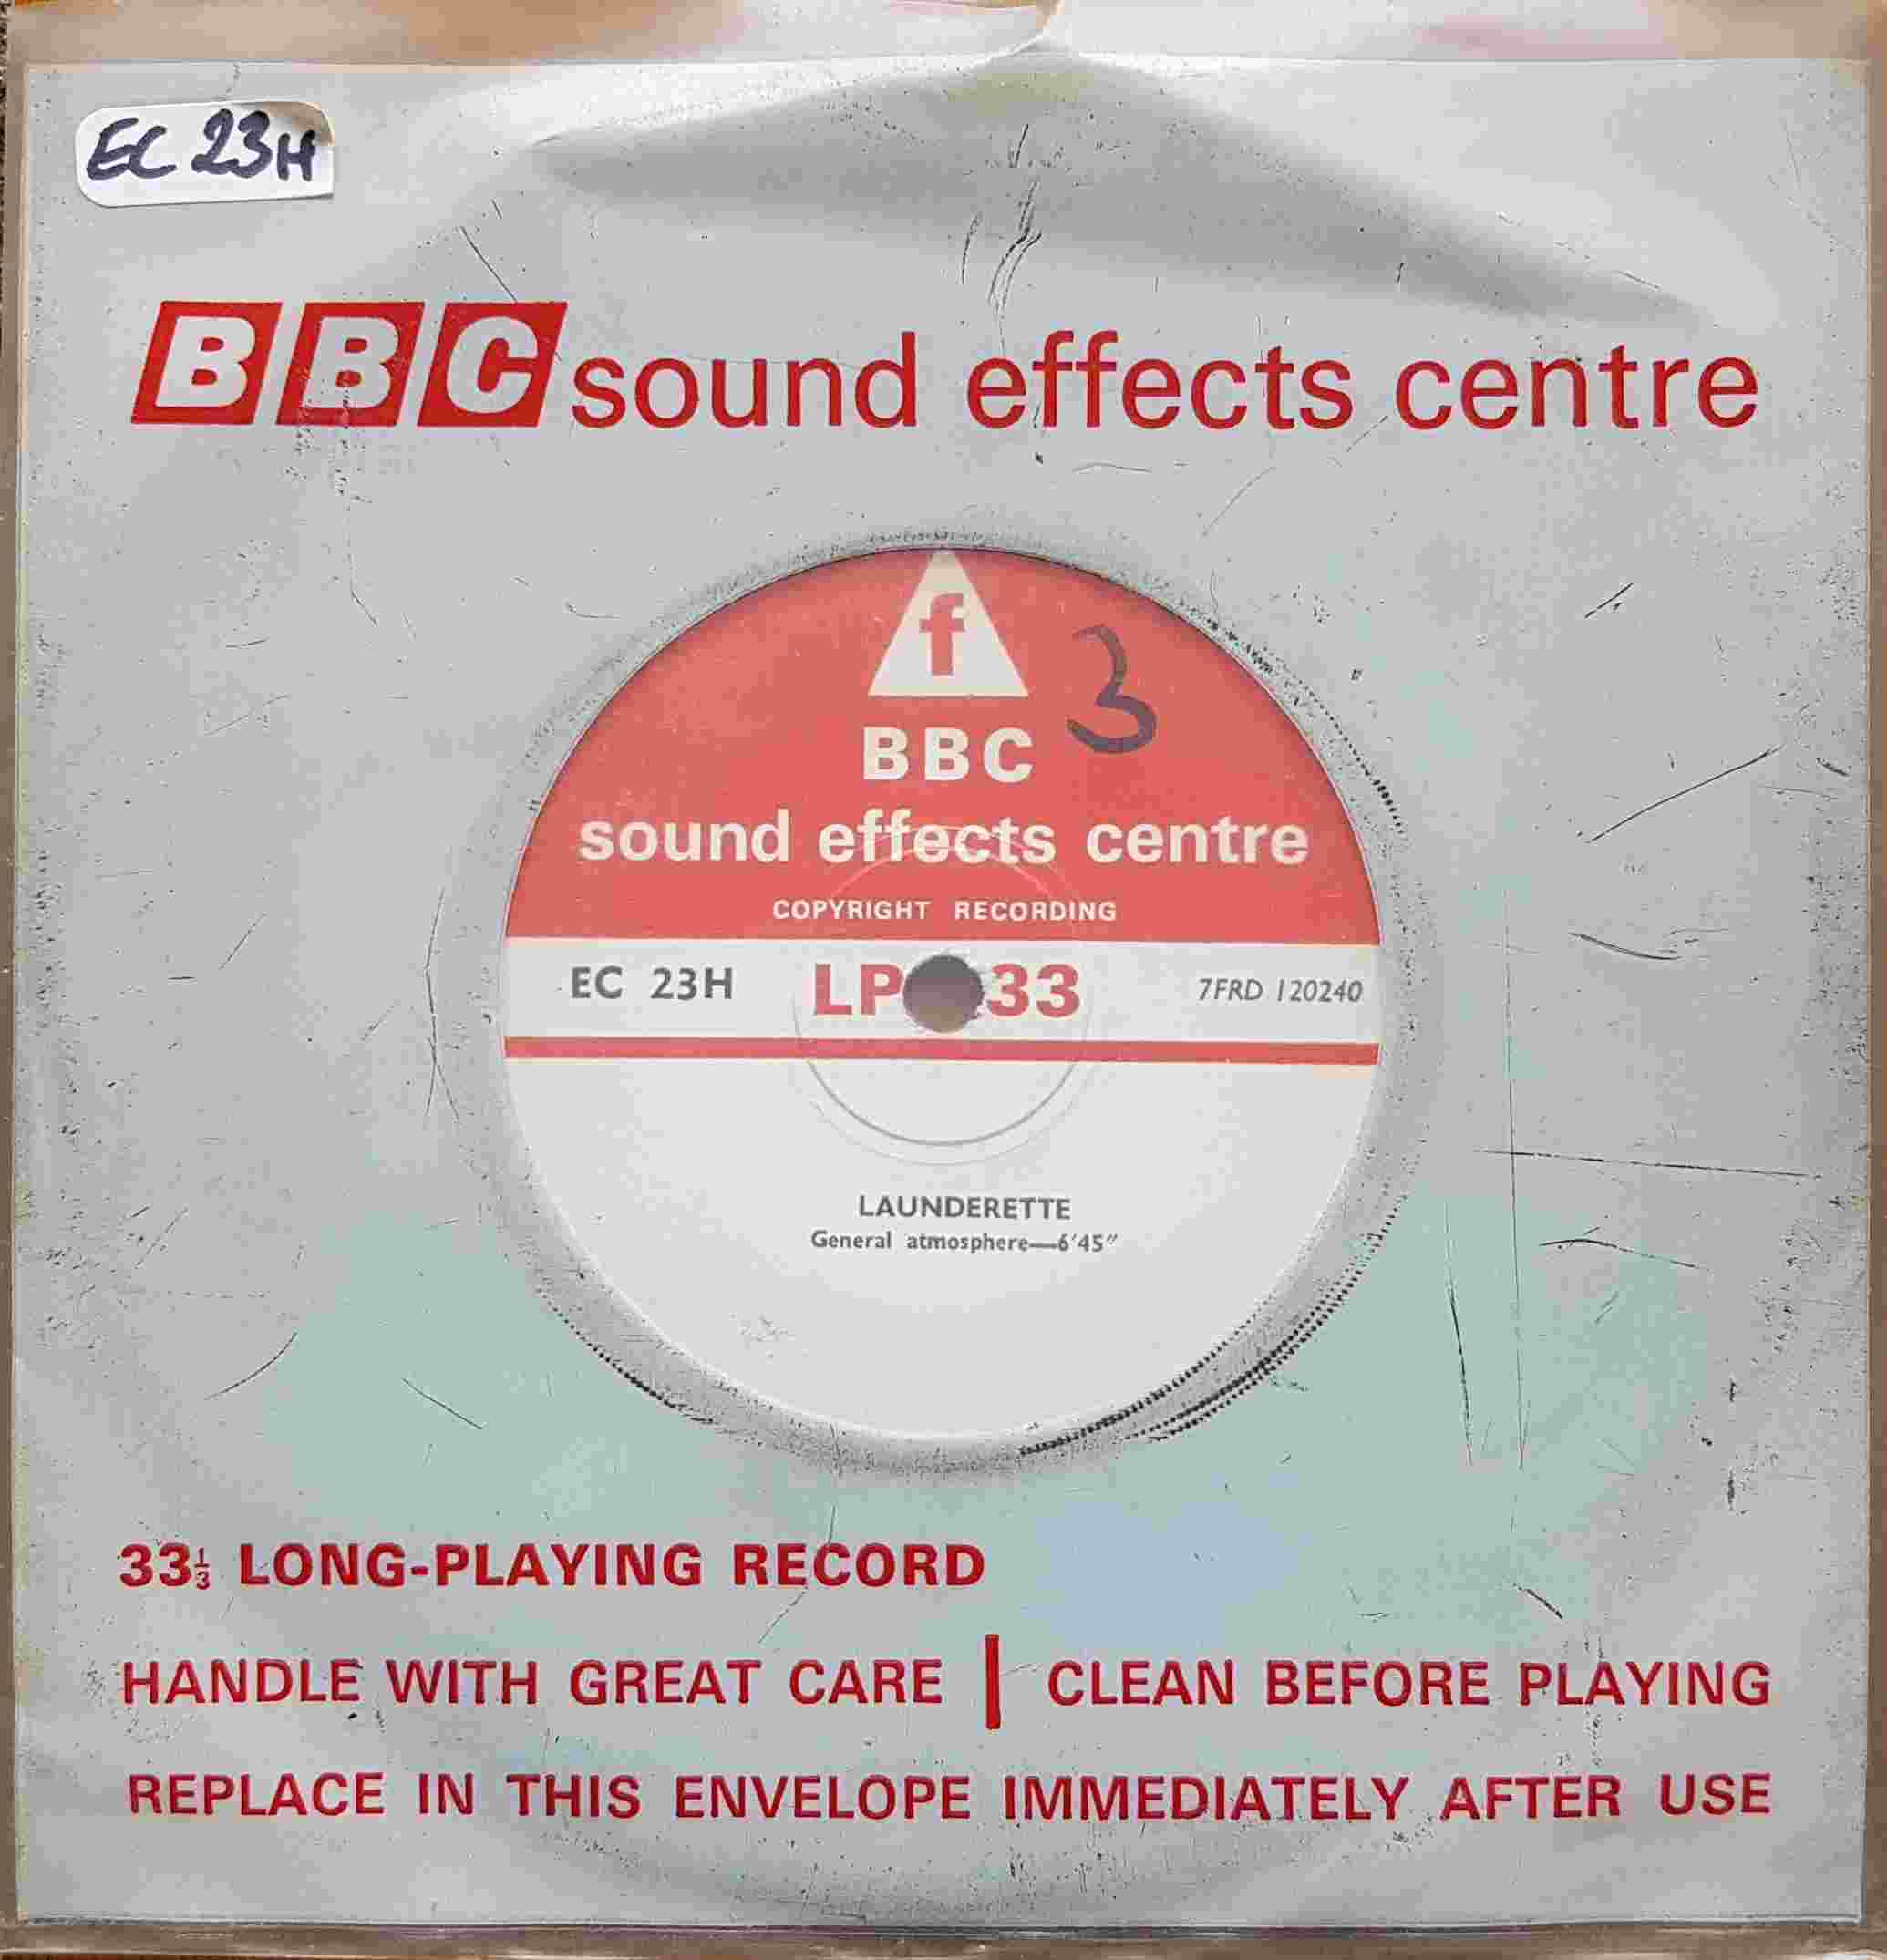 Picture of EC 23H Launderette by artist Not registered from the BBC singles - Records and Tapes library